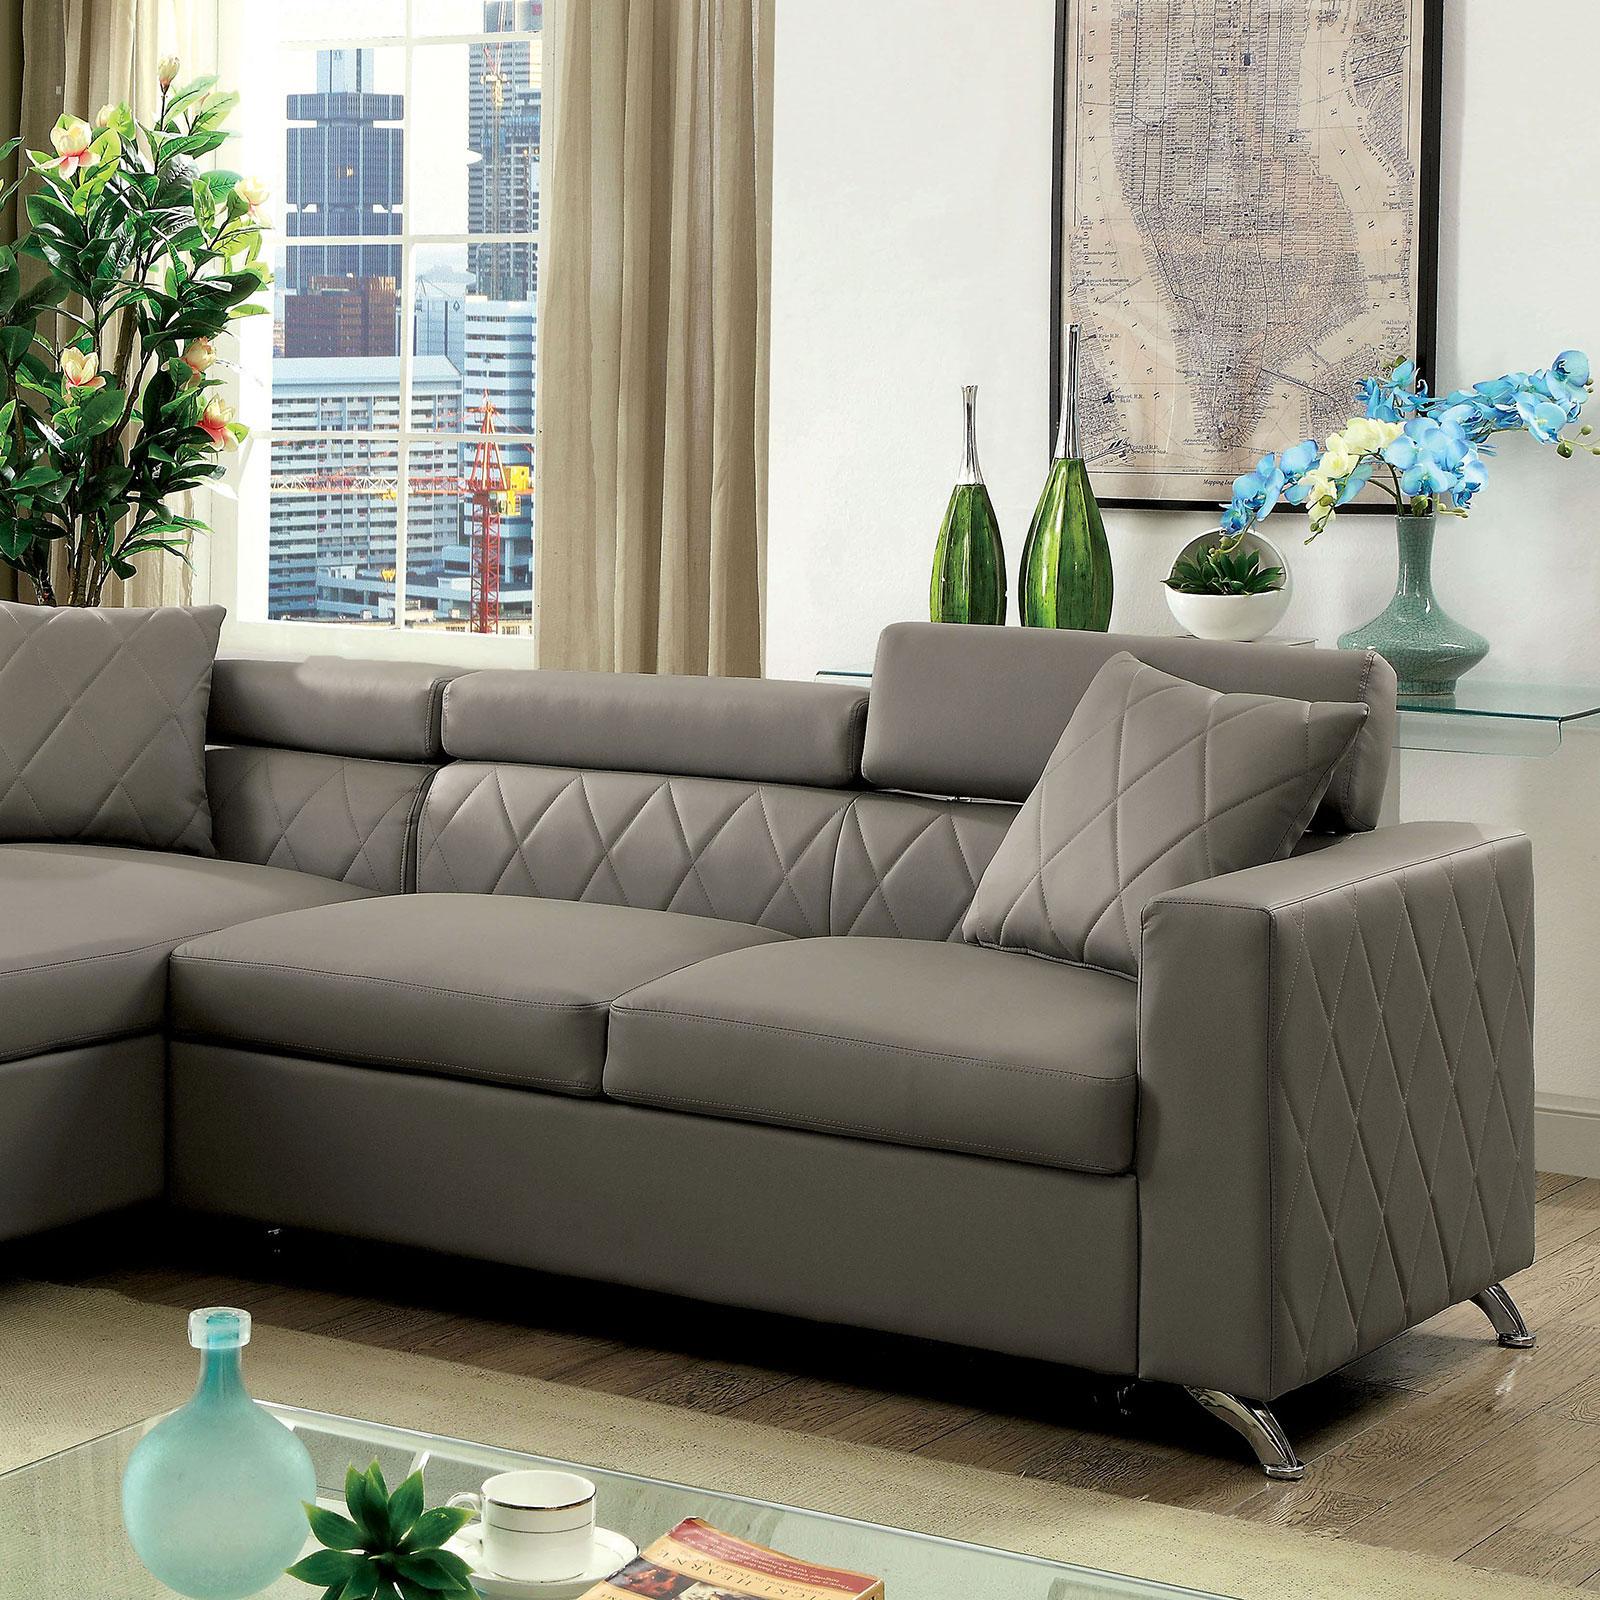 Contemporary Sectional Sofa Bed DAYNA CM6292 CM6292-SECTIONAL in Gray Fabric